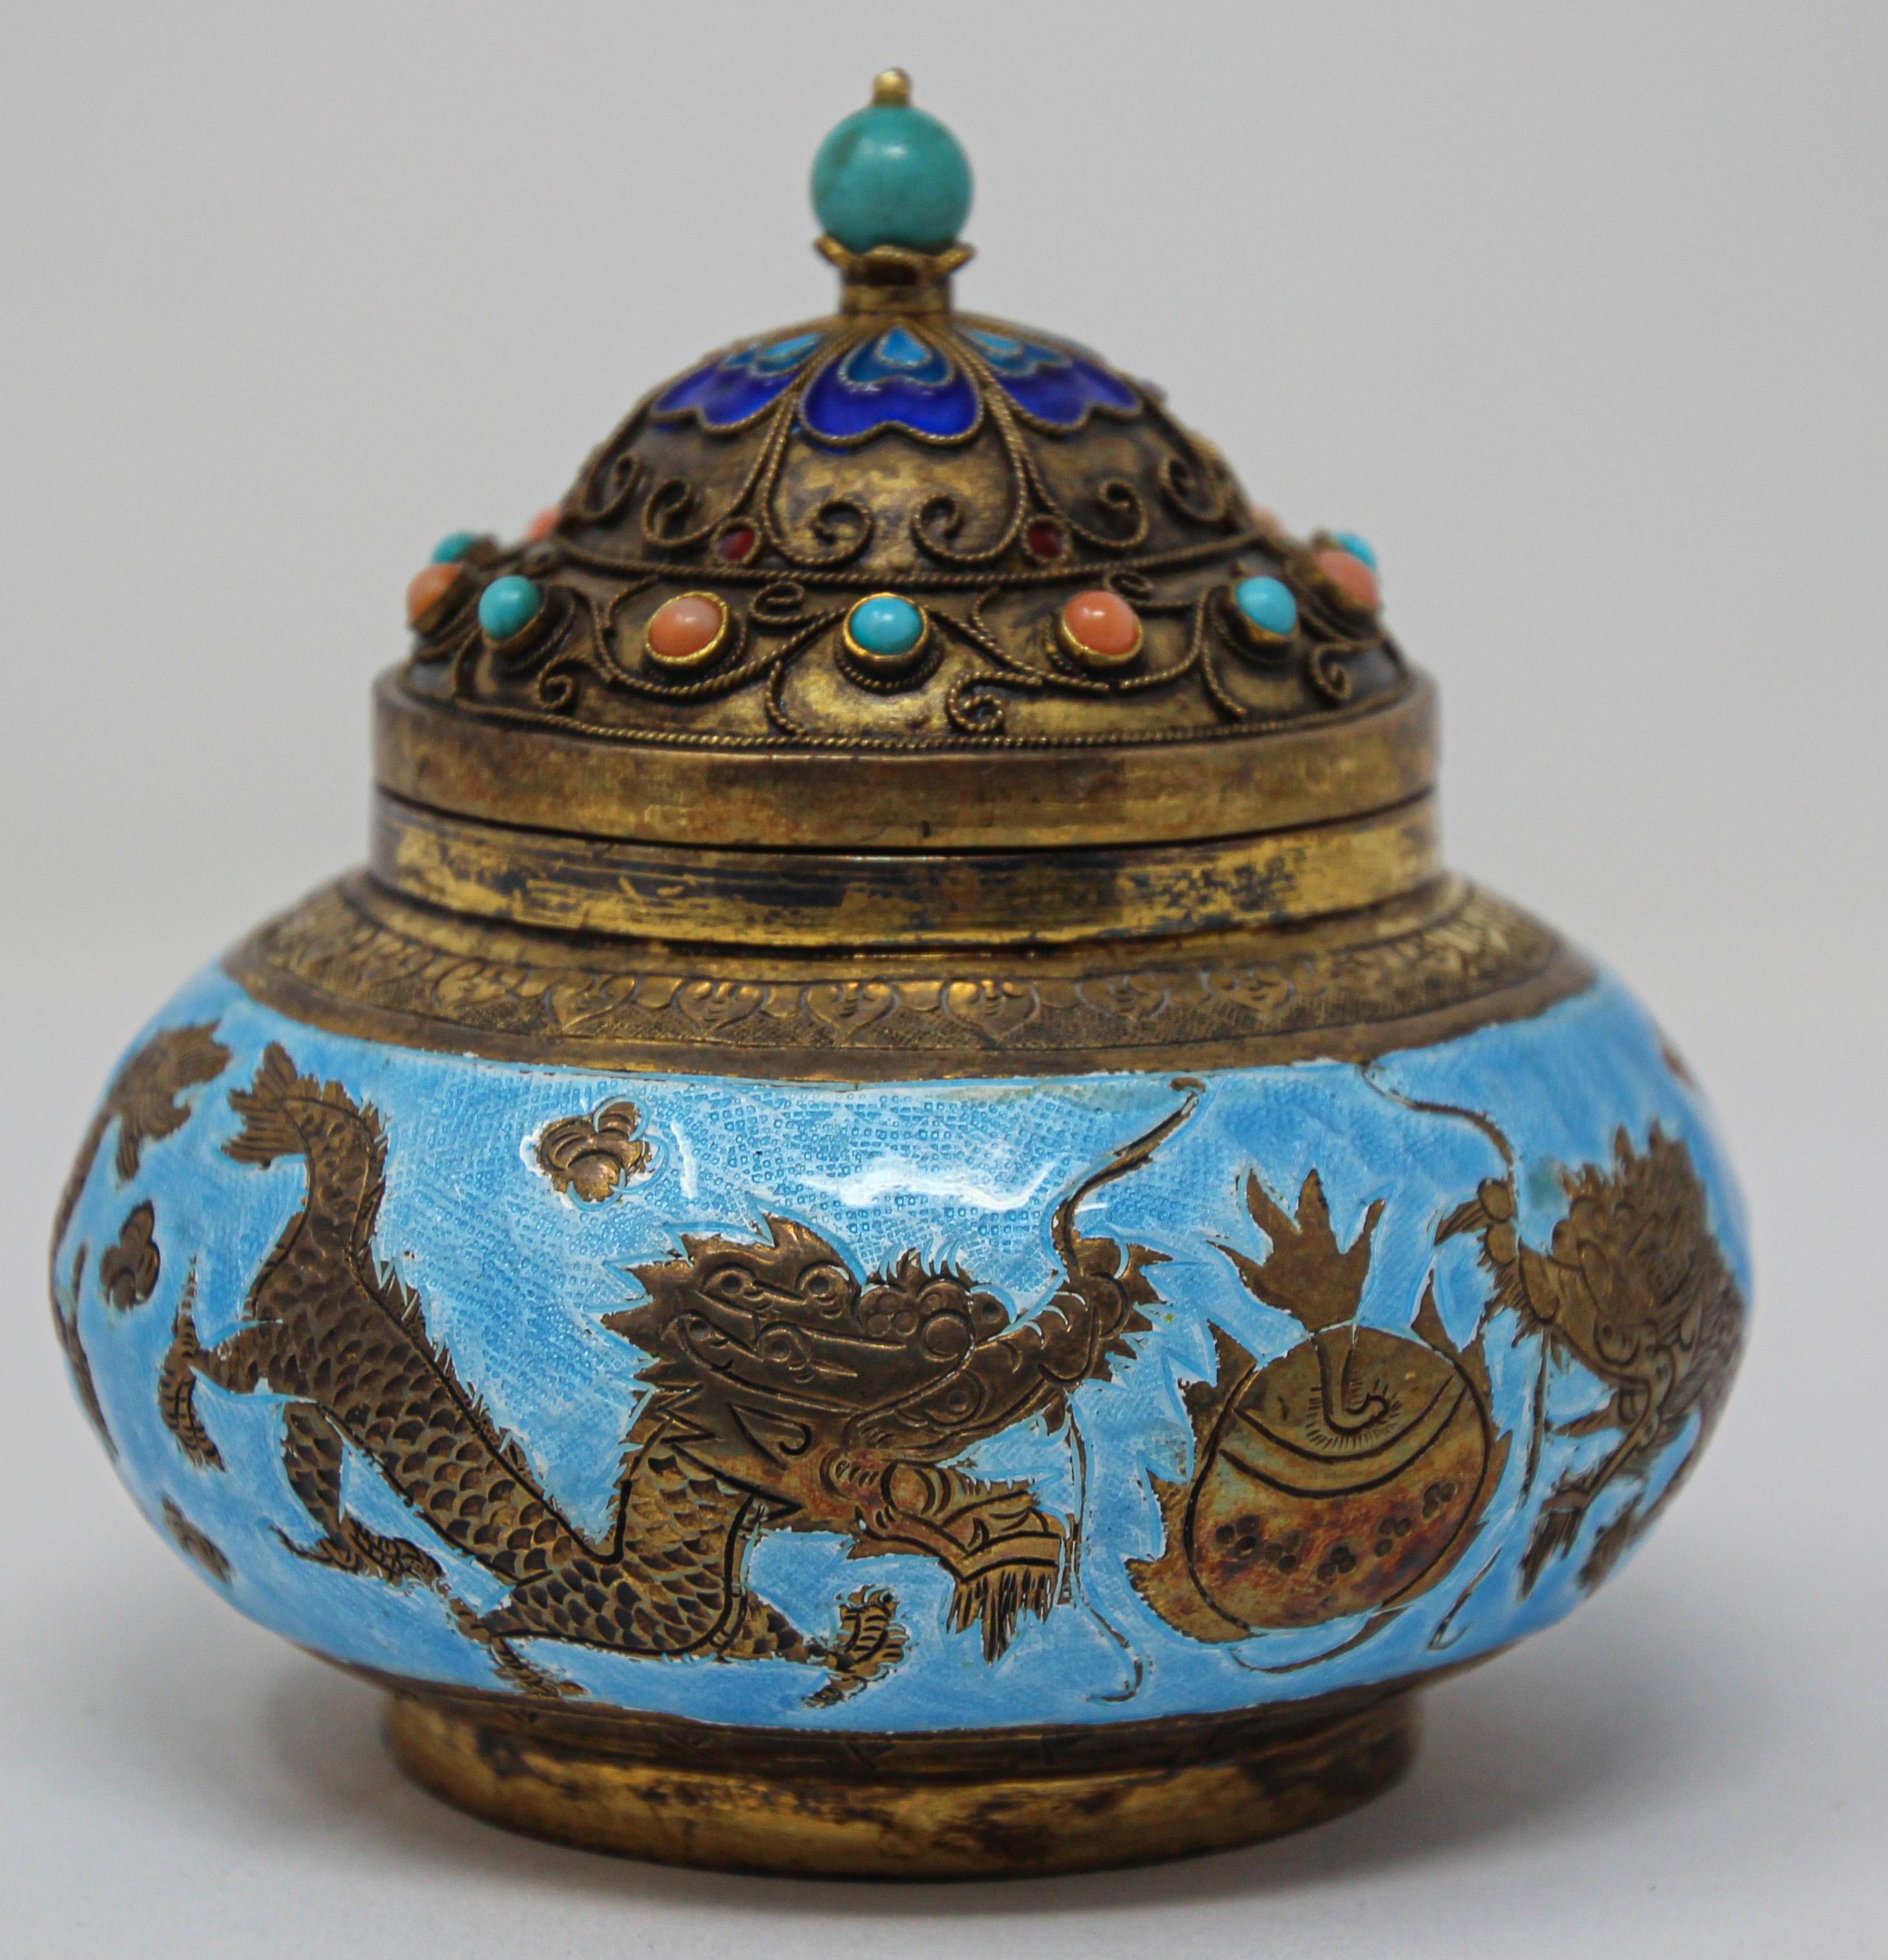 Asian Chinese export snuff or censor box hand painted with gold dragons on turquoise blue enamel background the top cover is enameled and inlaid with semi precious turquoise and coral stones.
Chinese brass and enamel tea or opium, snuff lidded box